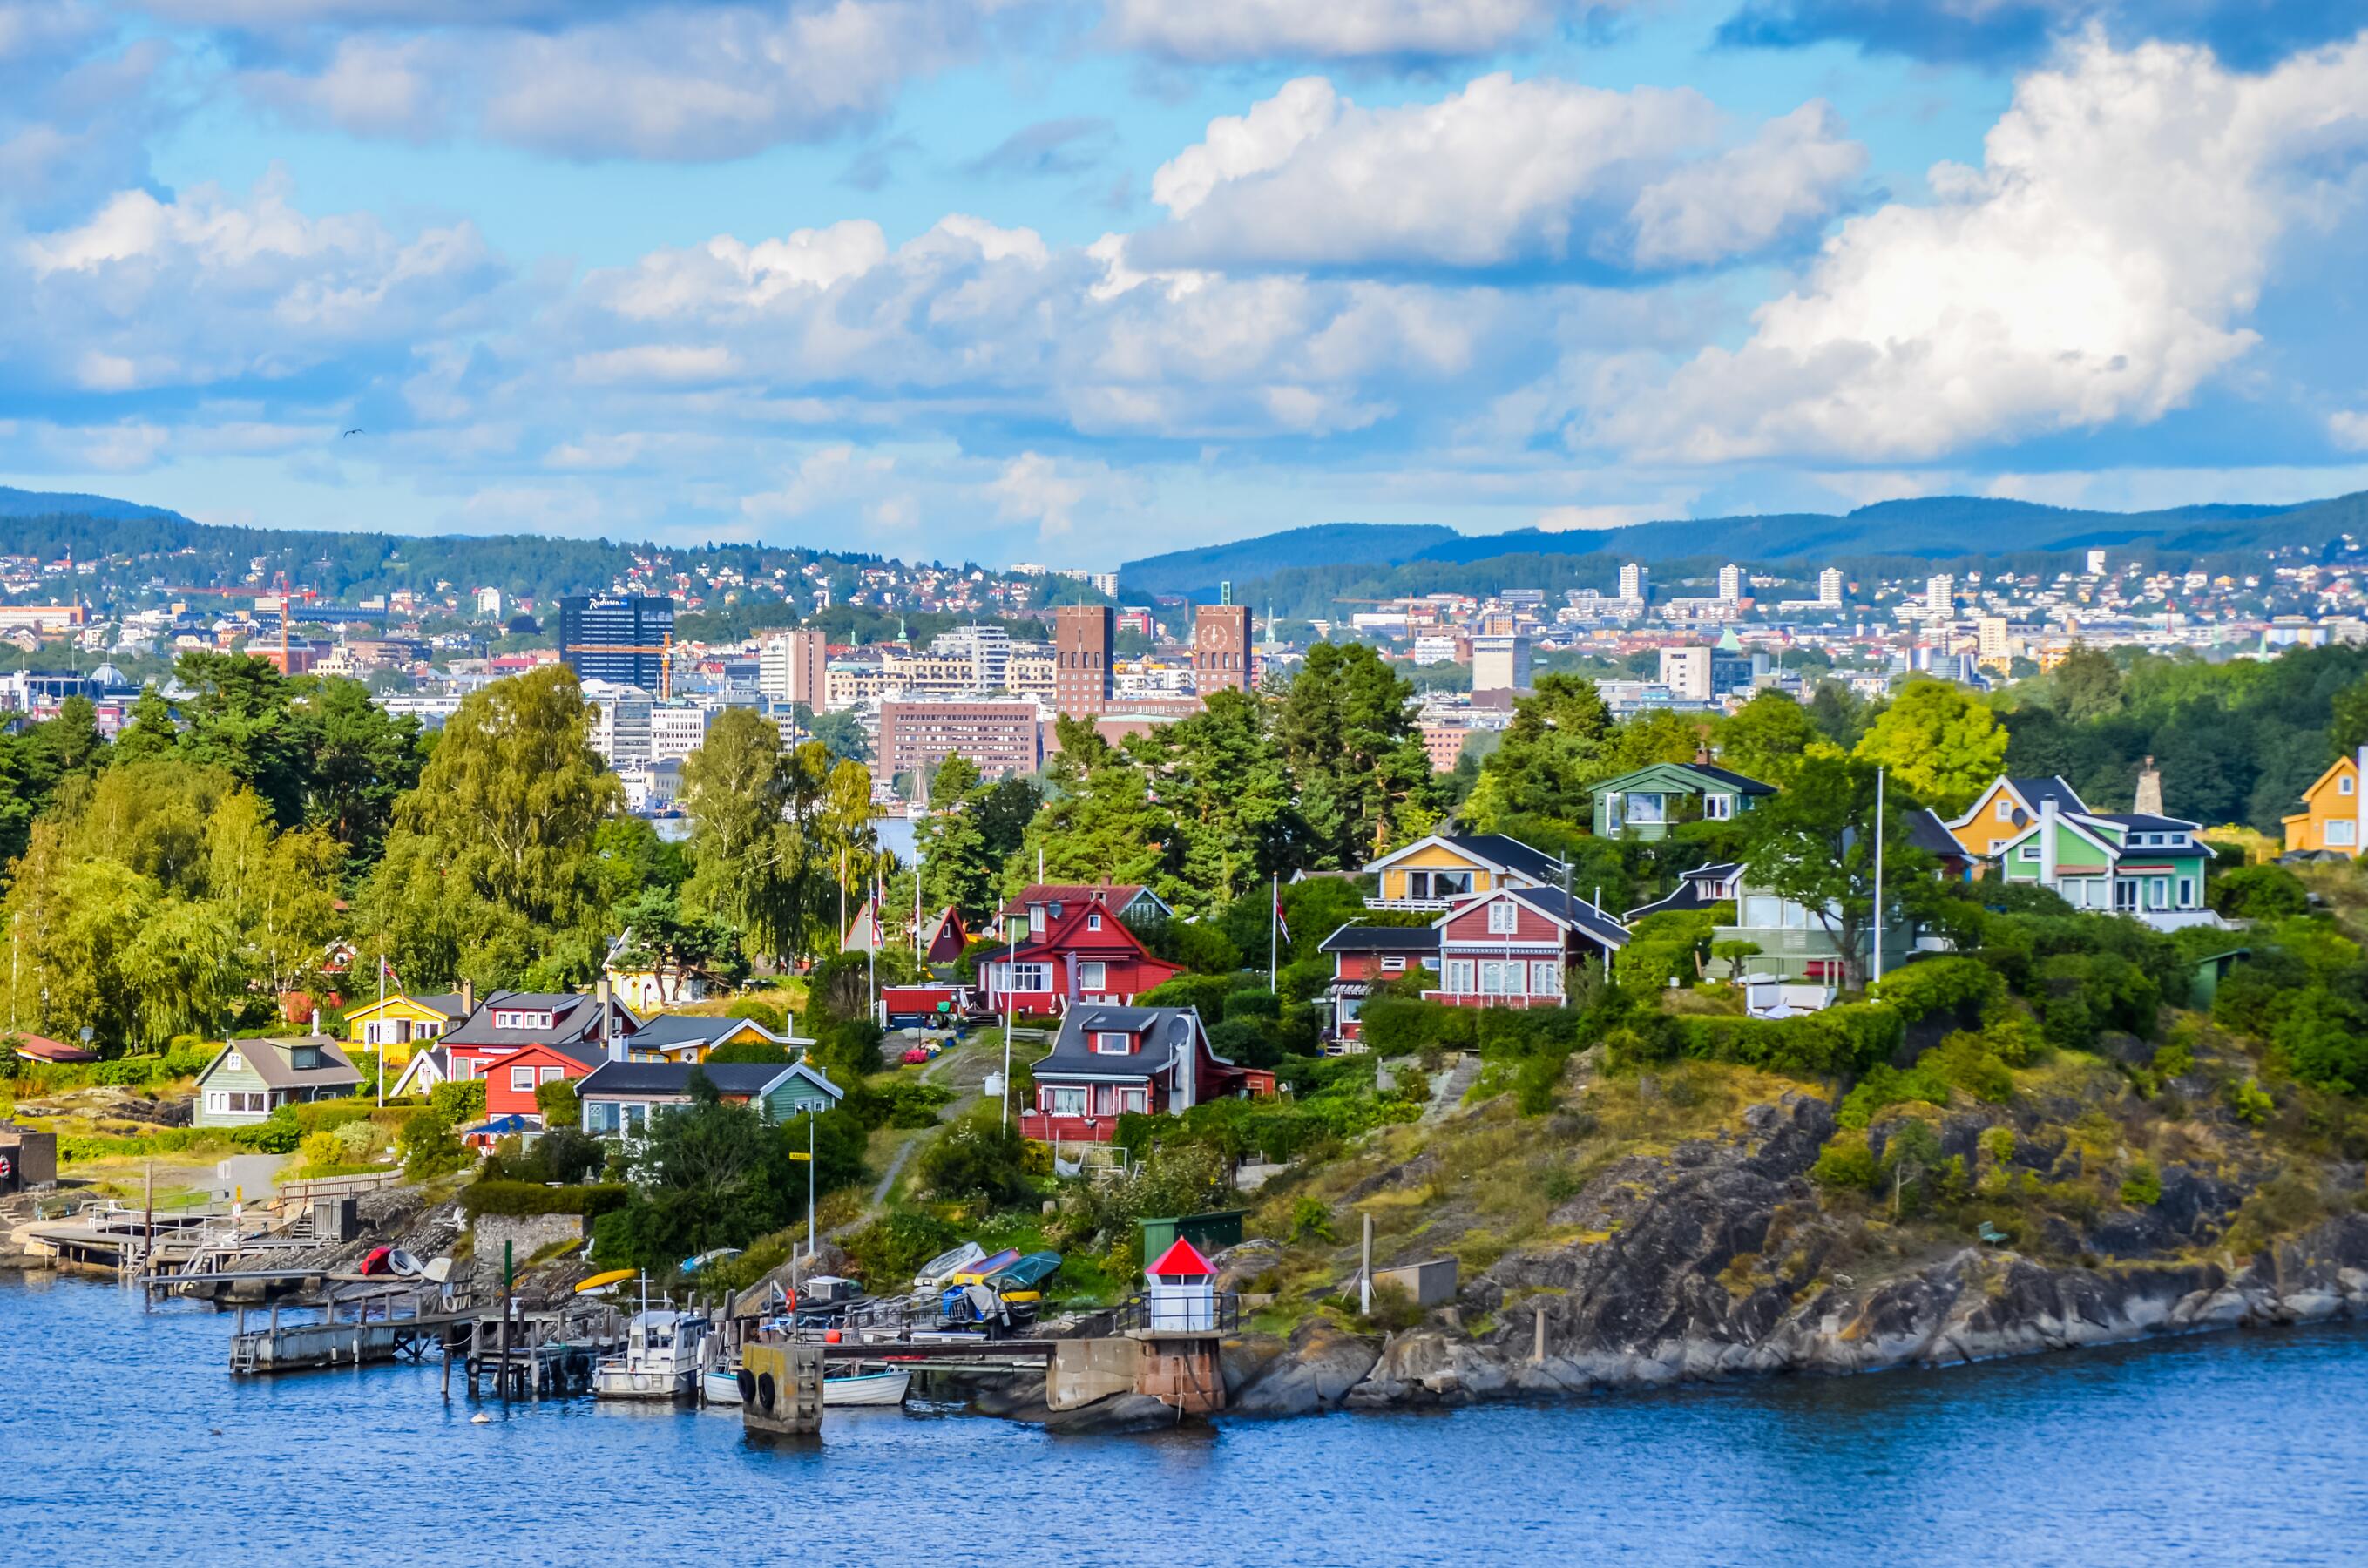 Is Oslo the Most Environmentally Friendly City in the World?